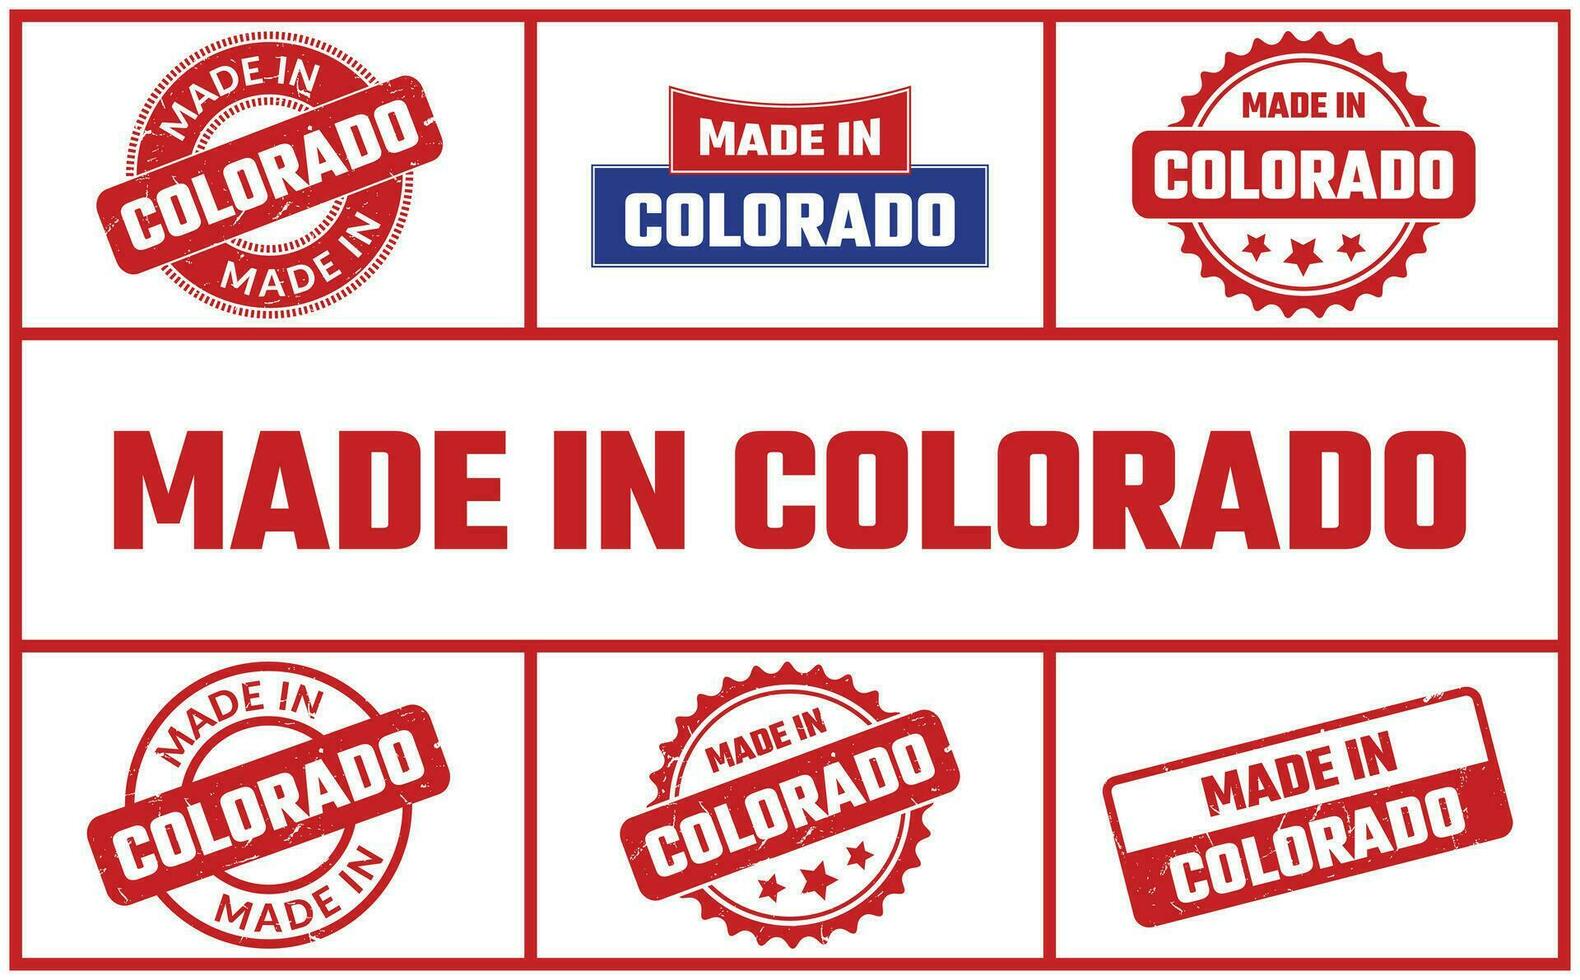 Made In Colorado Rubber Stamp Set vector